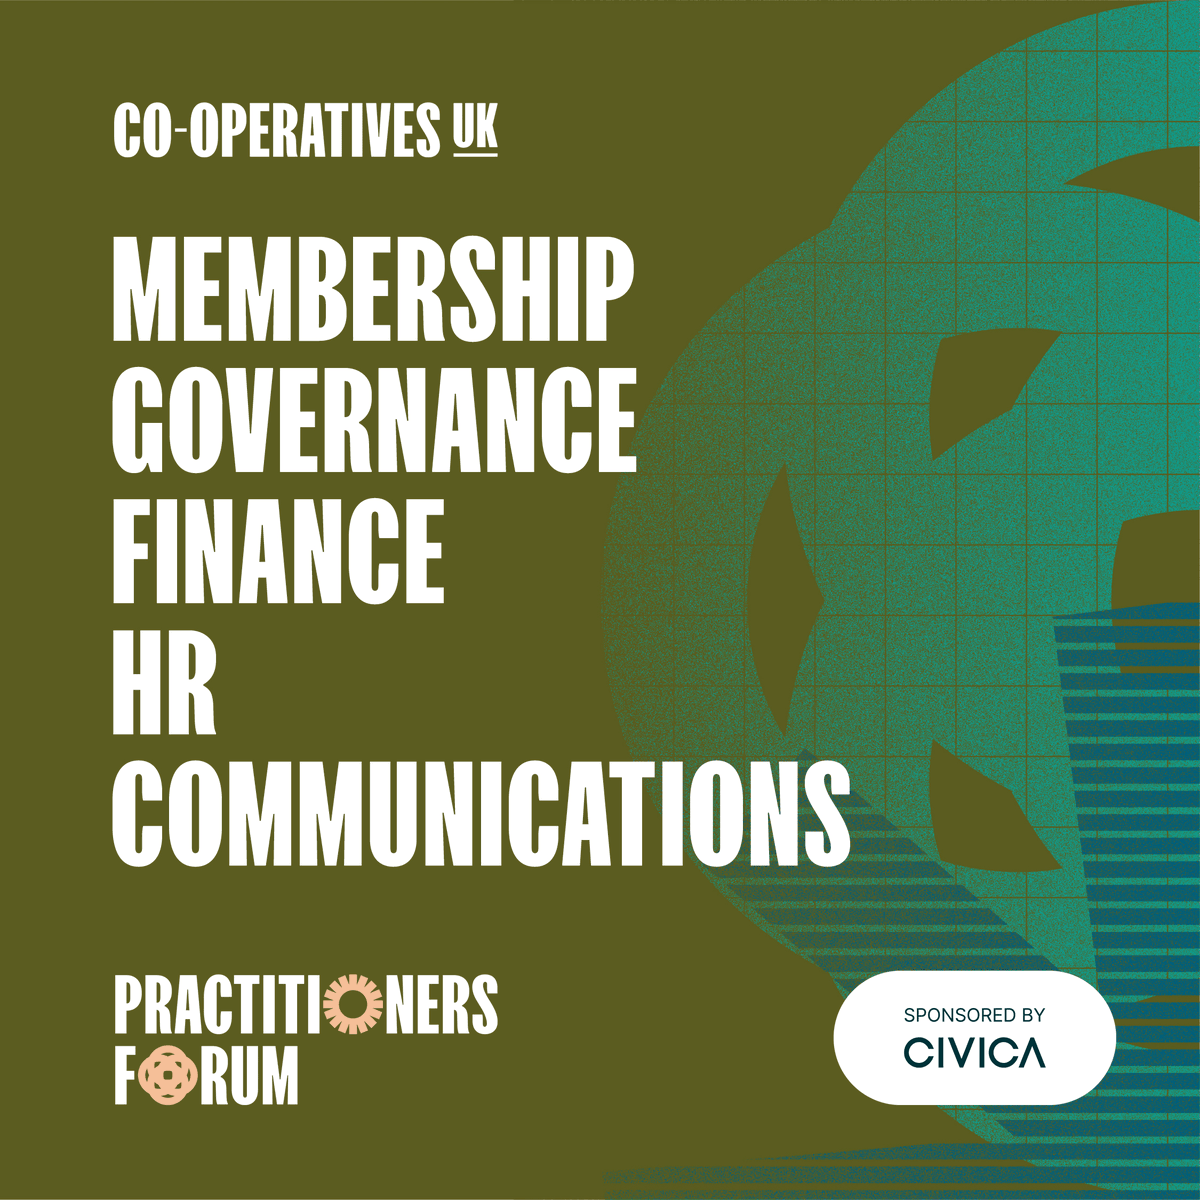 ⭐ PRACTITIONERS FORUM, 23 November, Manchester. Join delegates from @UnicornGrocery @CoffeeCranks @PeopleRetrofit @ABCULCUs @CoopParty + more for a packed day of learning and networking. Bursary and member discounts available 👉 bit.ly/3R6f10P – sponsored by @CivicaUK